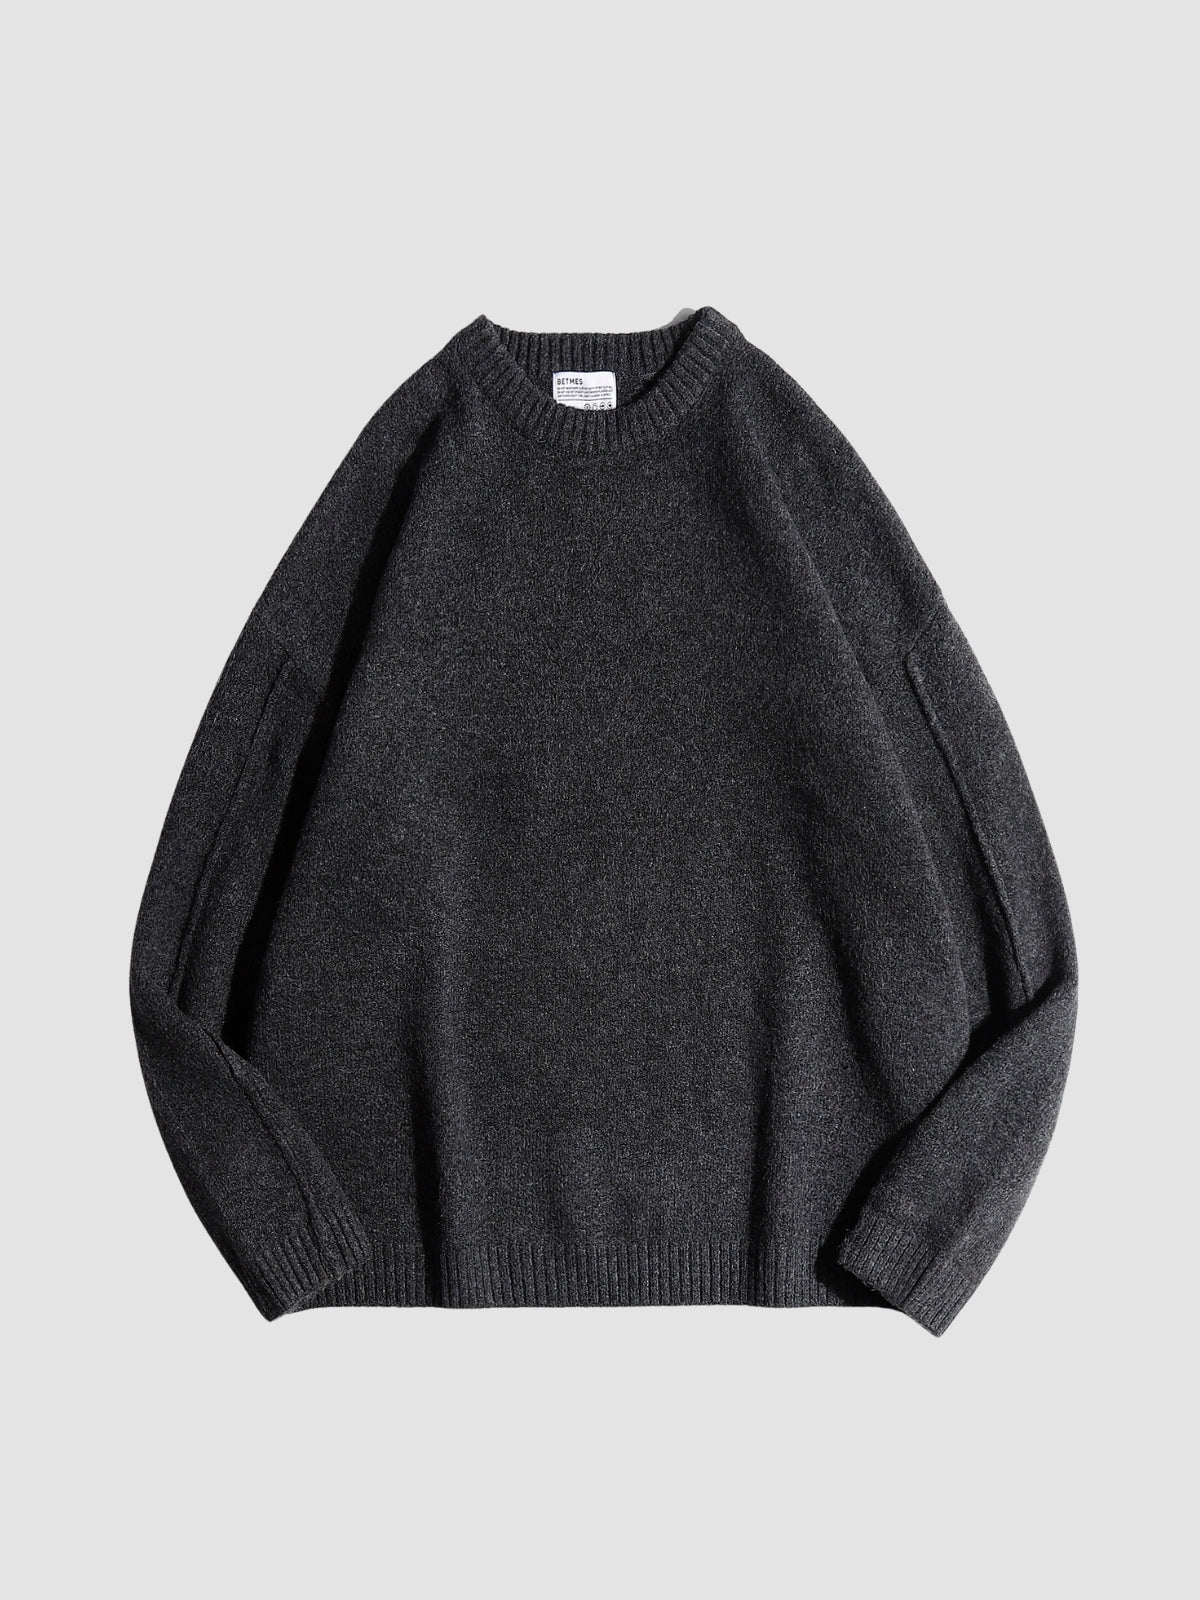 WLS Japanese Retro Solid Loose Sweater